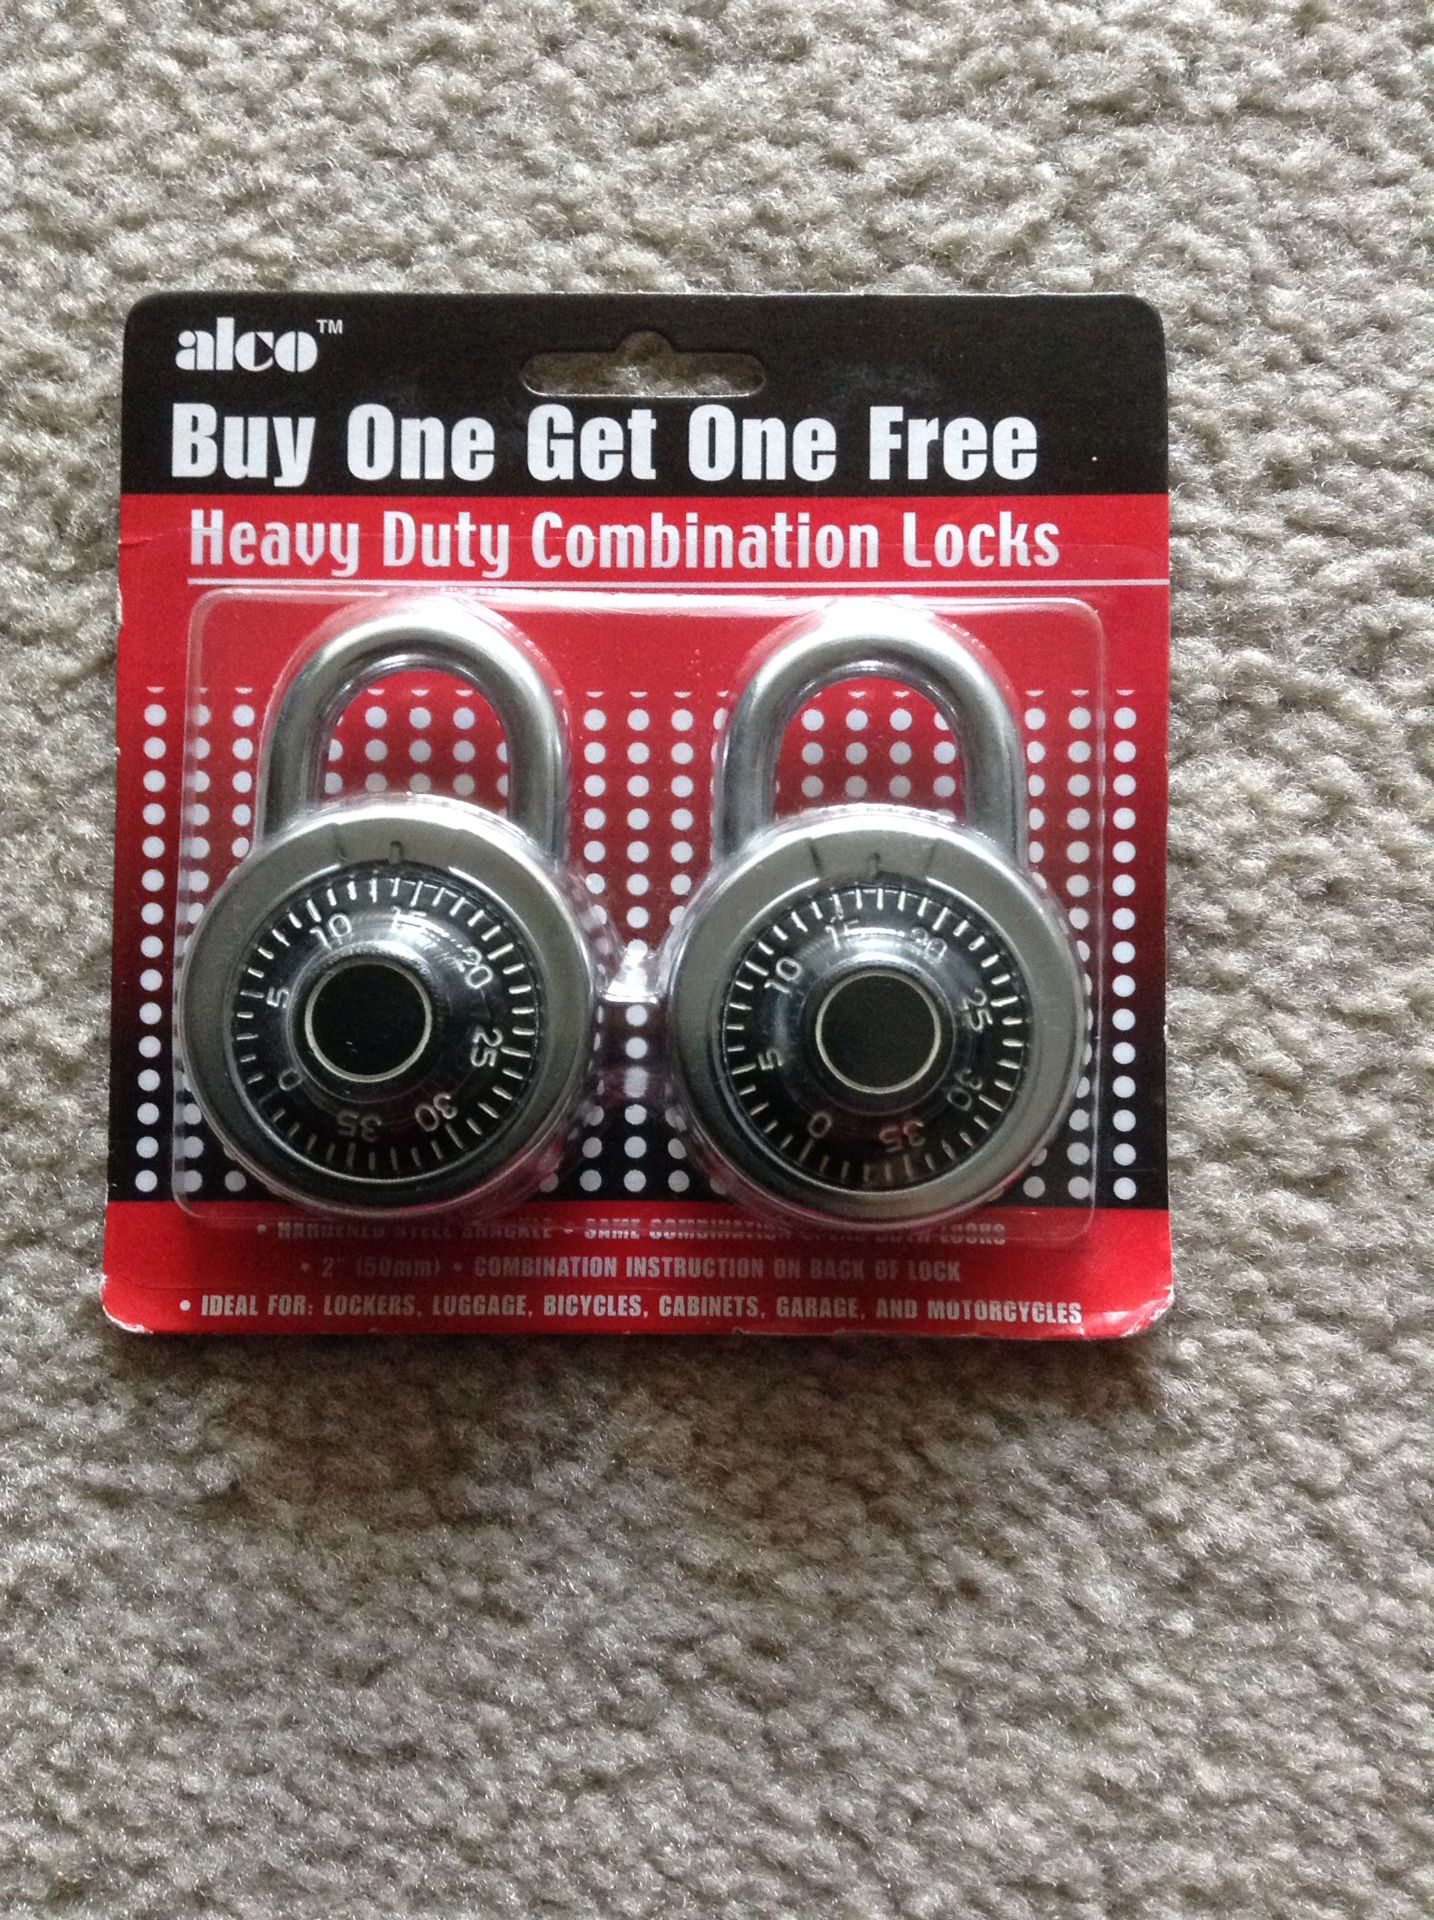 NEW!!! Combination Locks Heavy Duty with a Dial - Lockers, Bicycle, Luggage, Cabinets, Home or Office - $15